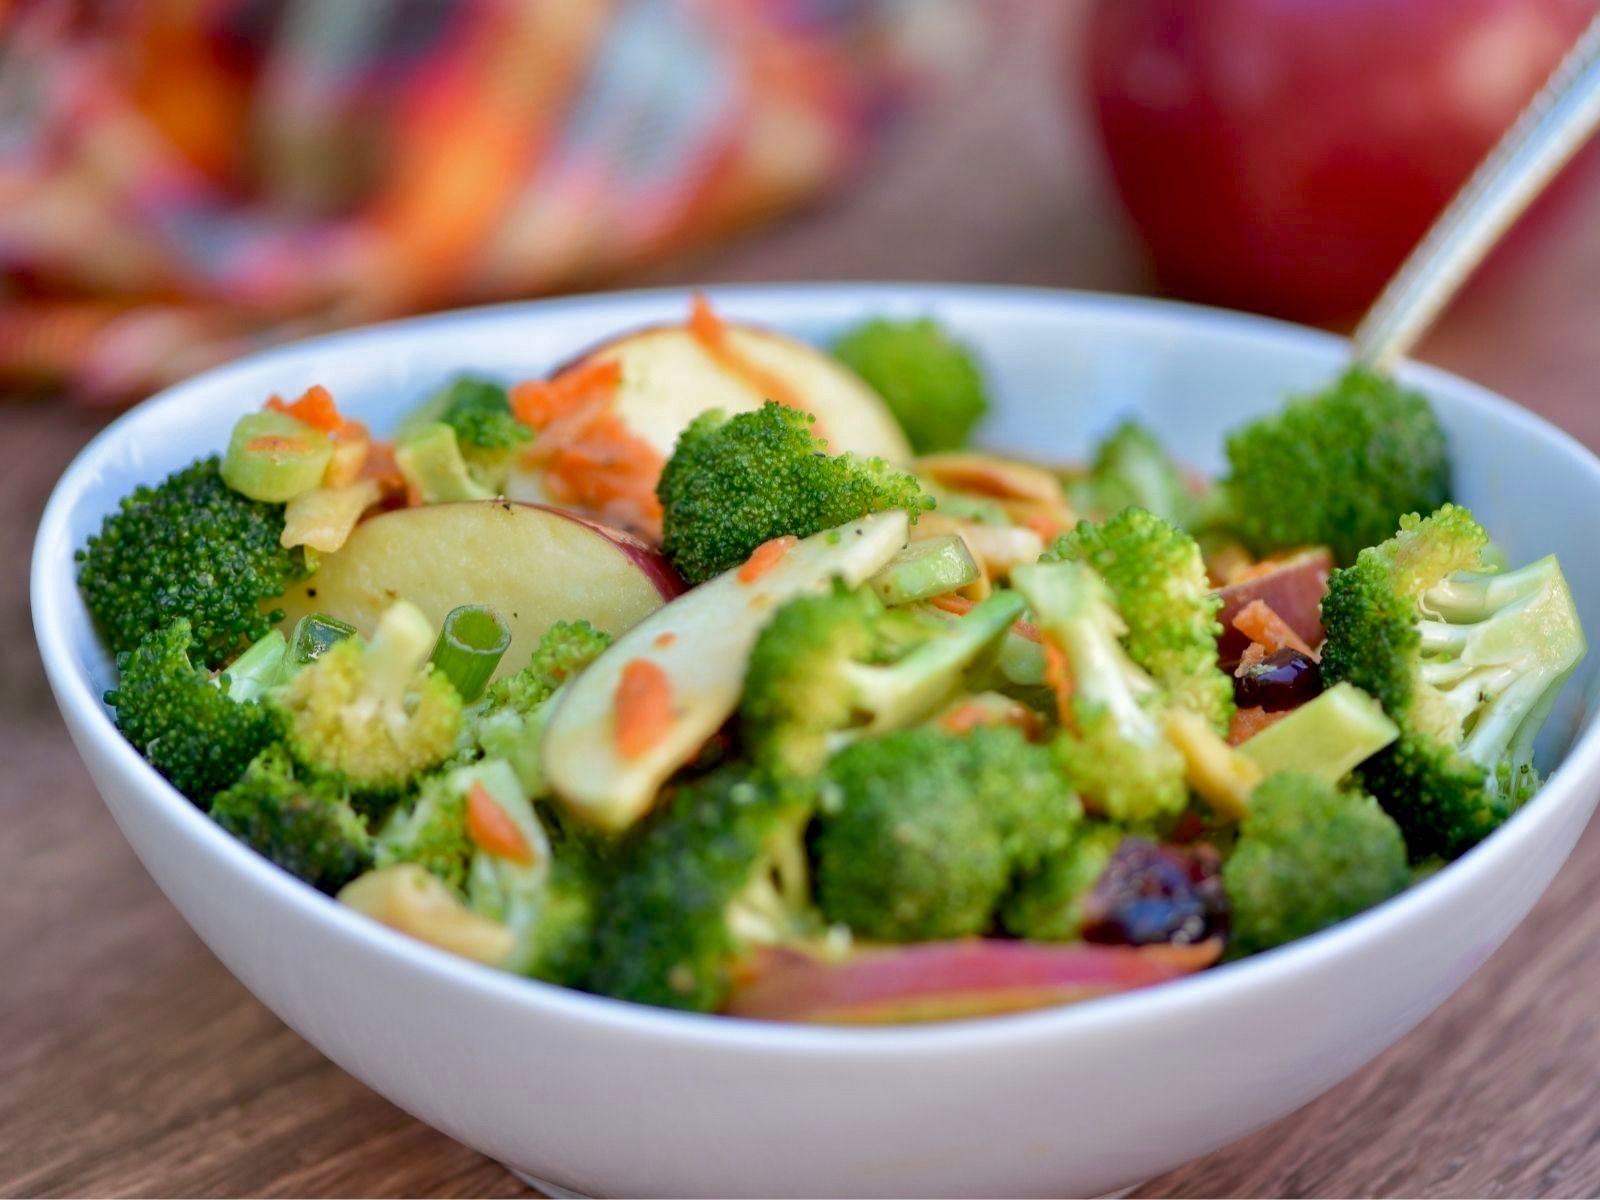 Broccoli Crunch Salad with Apples and Almonds in a white bowl
